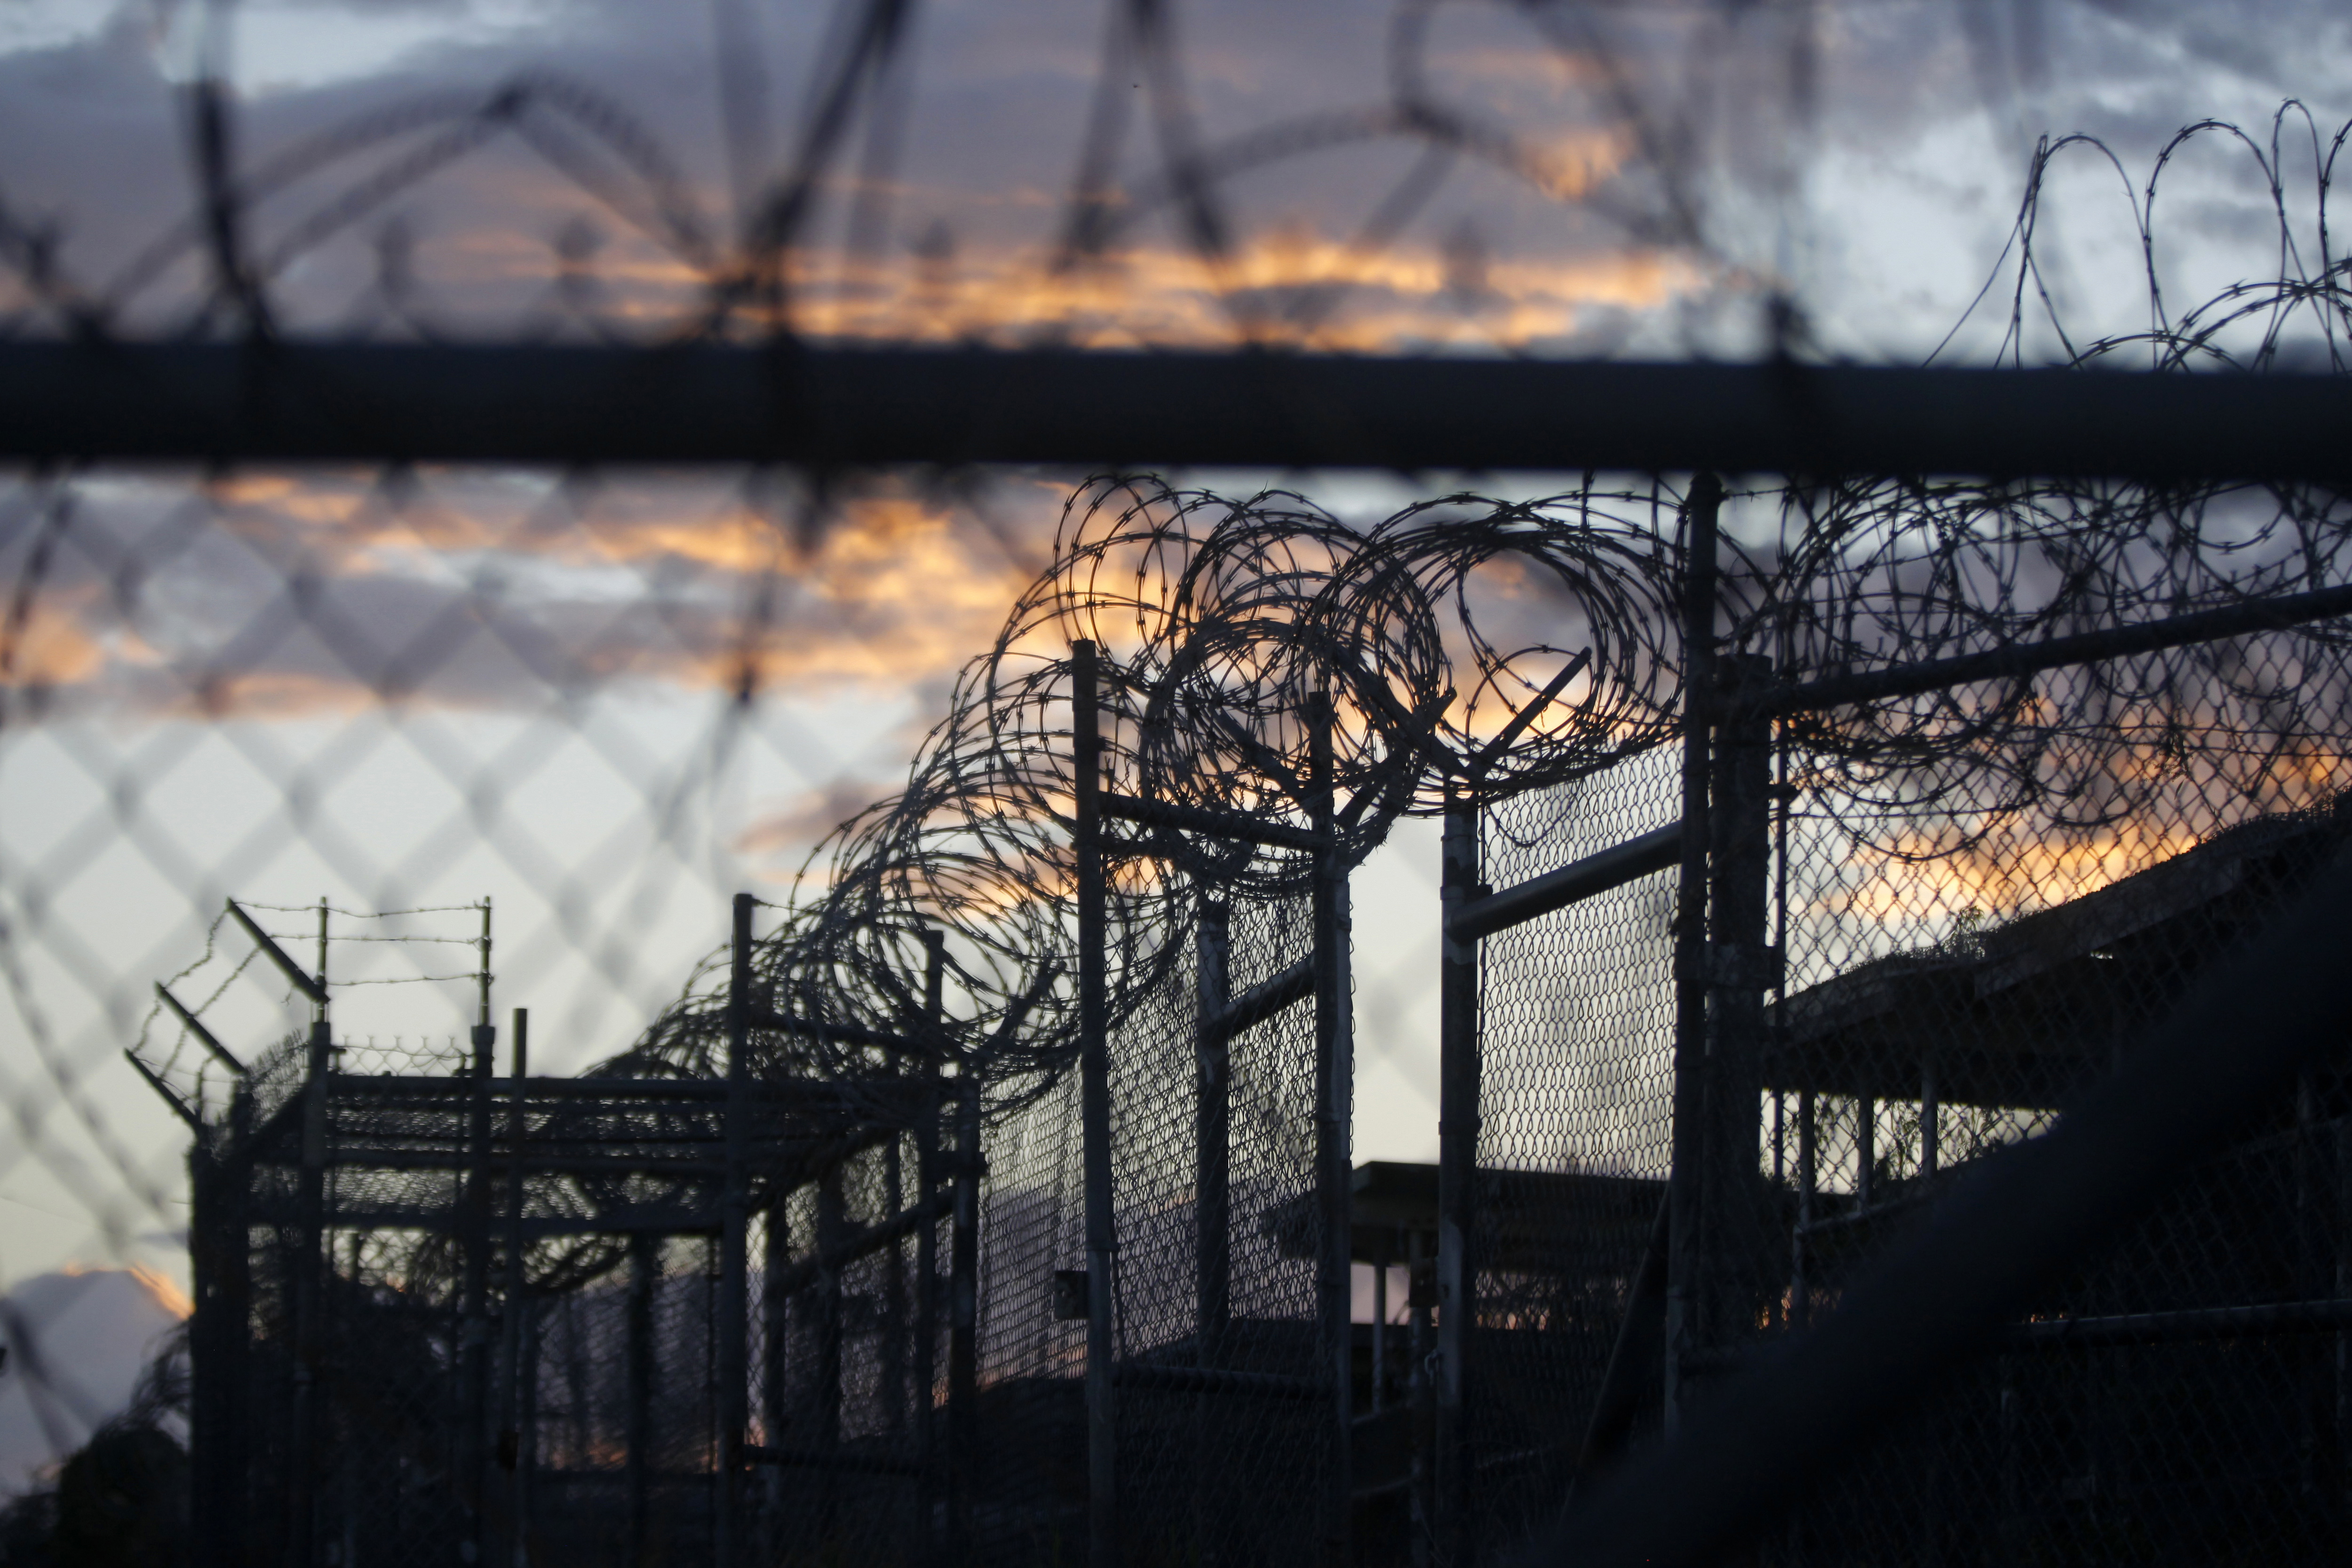 Commander of Guantanamo Bay prison is fired